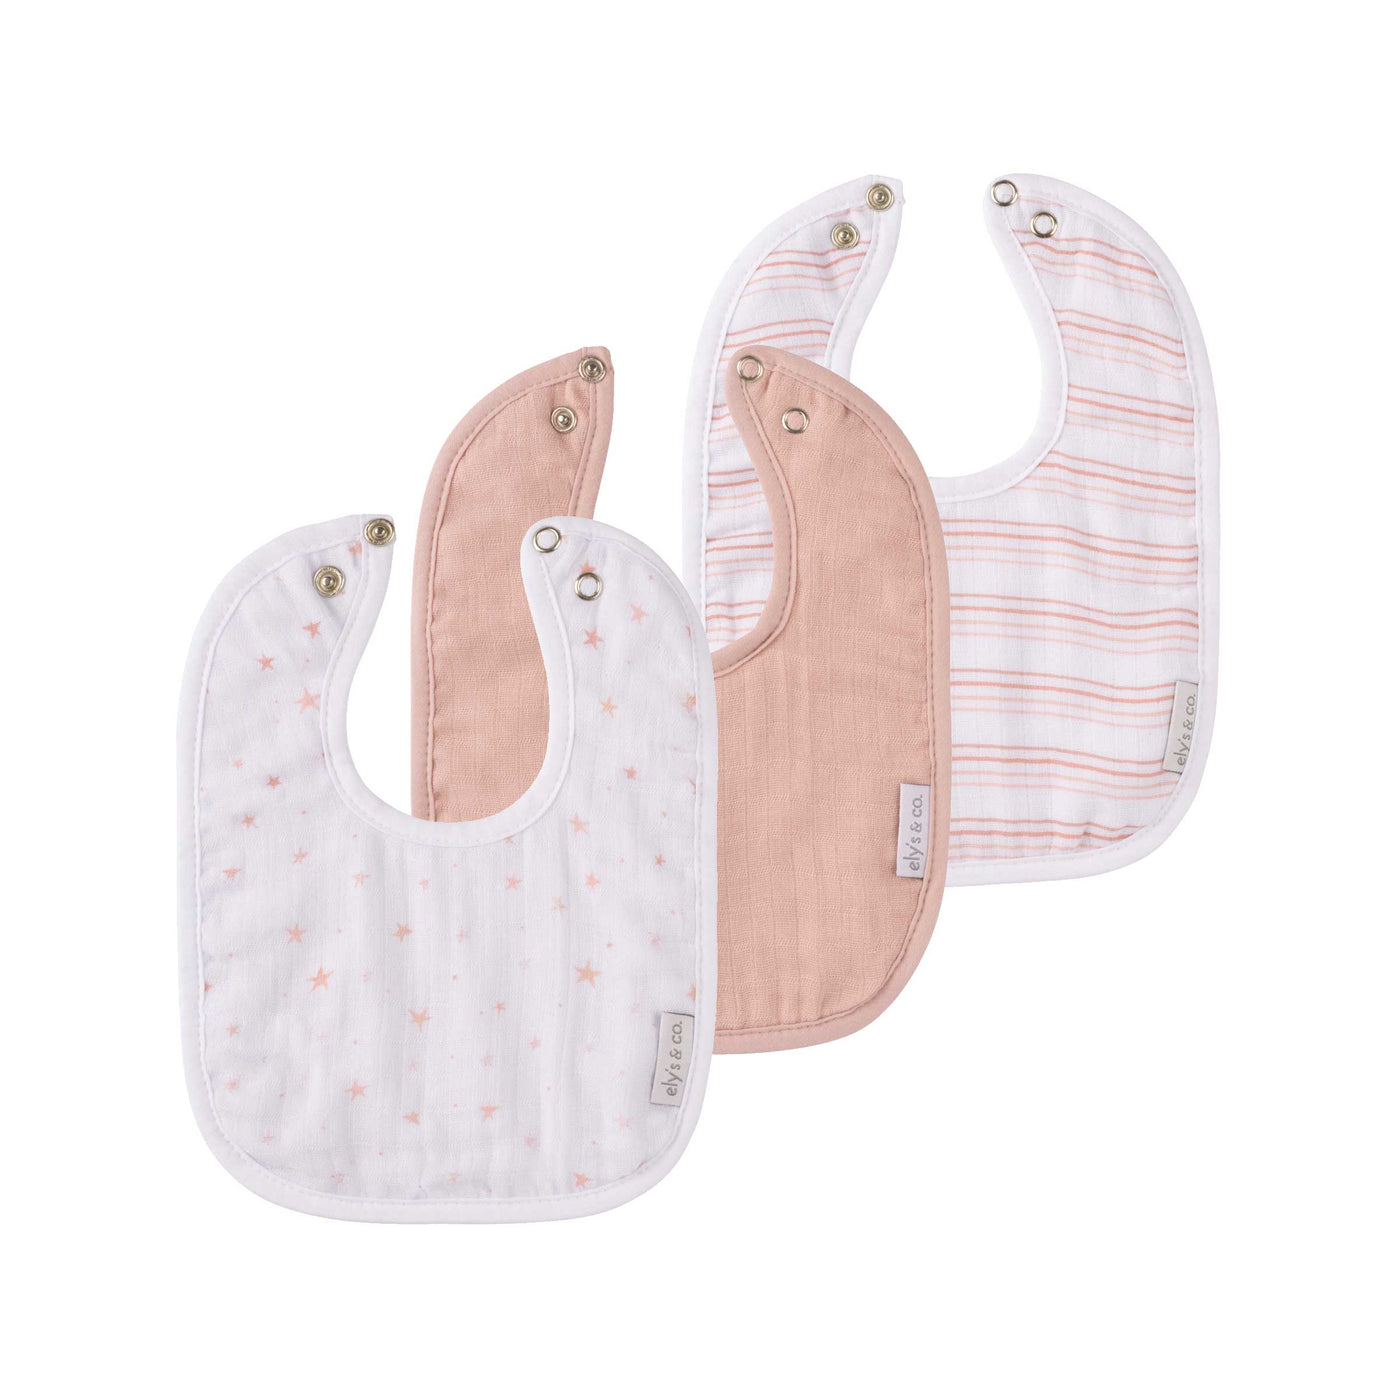 Ely's & Co. 3 Pack Bibs - Pink Stripe Collection